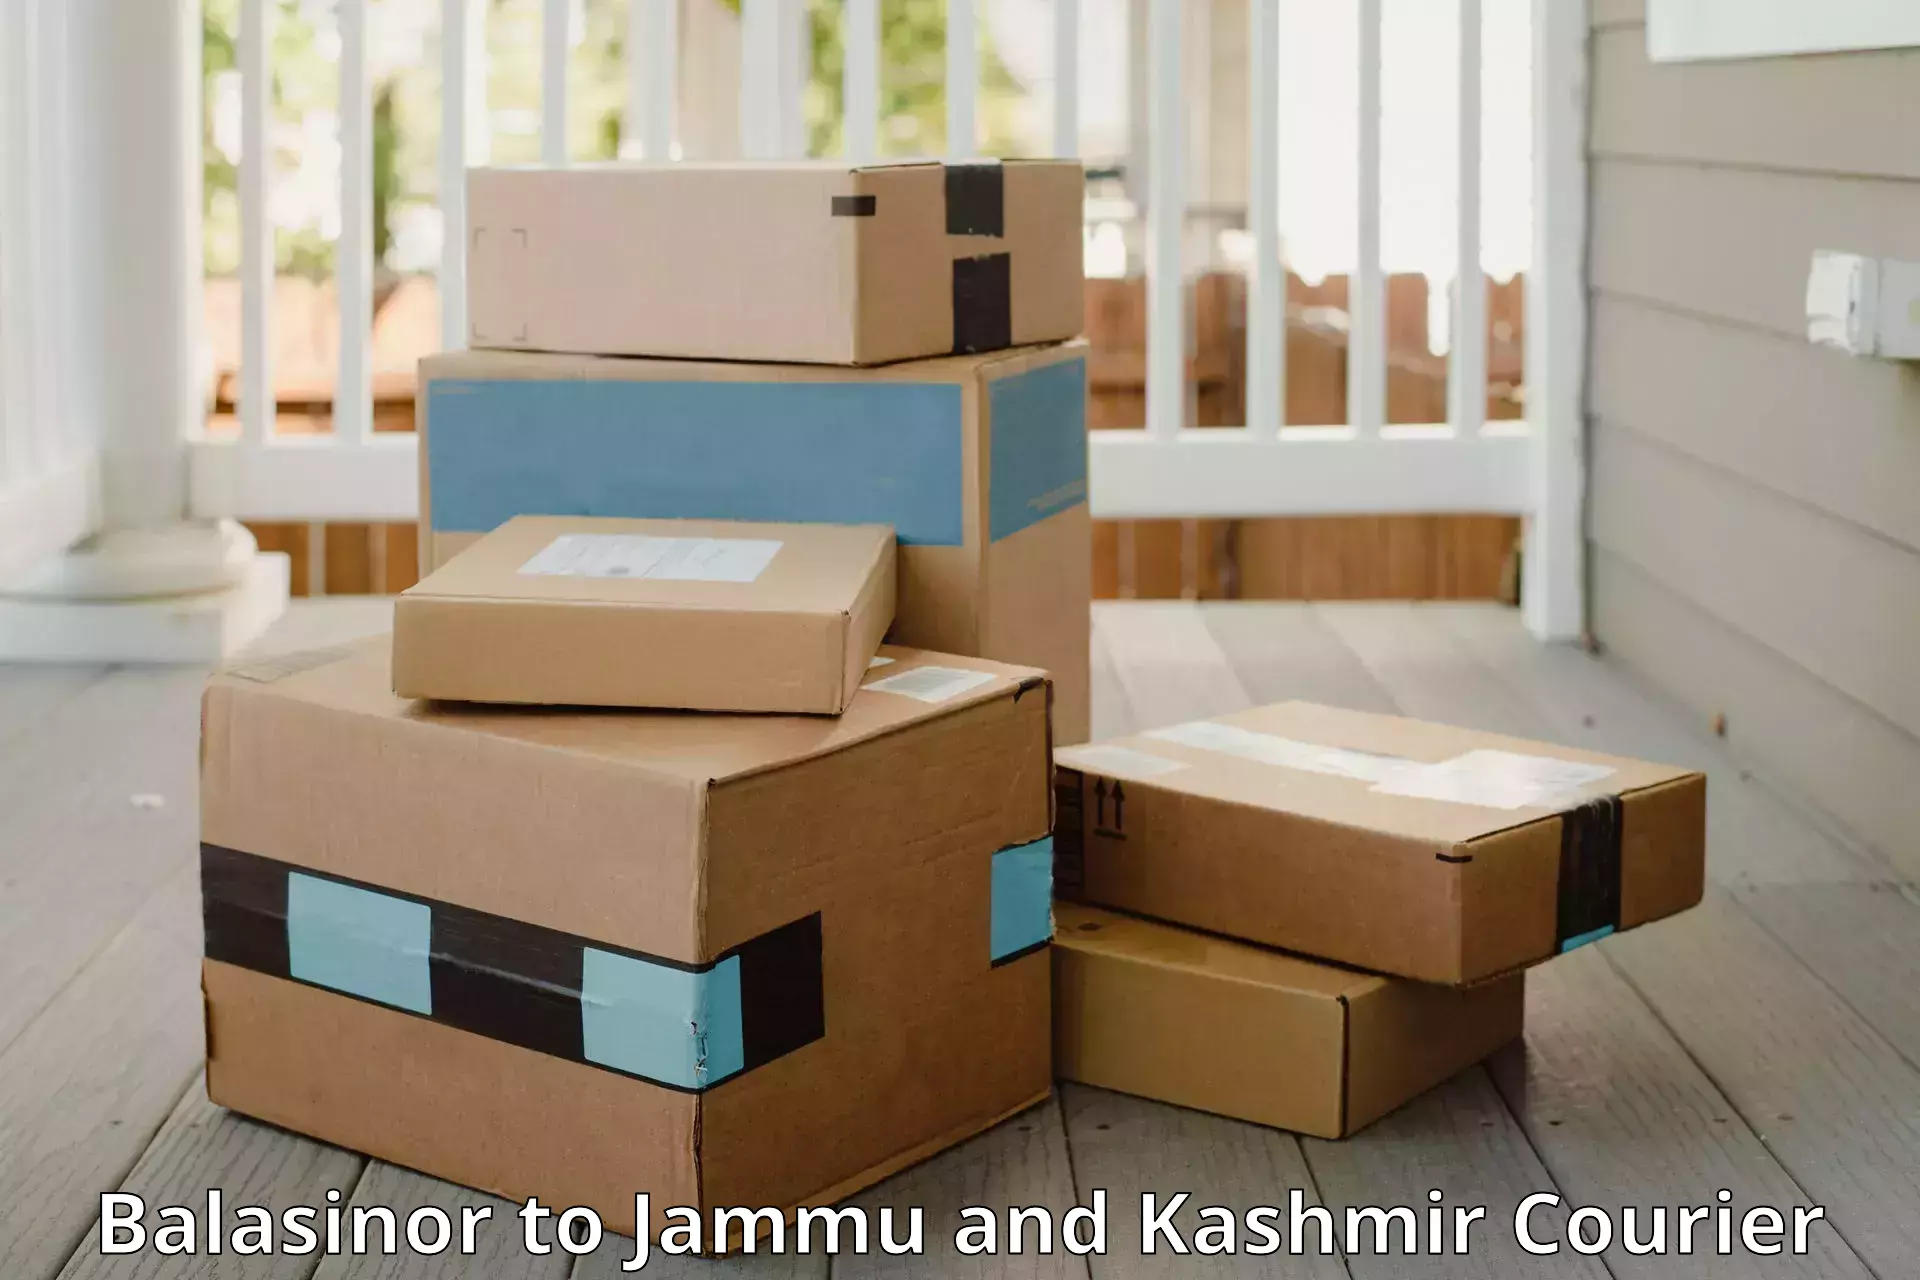 Express luggage delivery Balasinor to Jammu and Kashmir